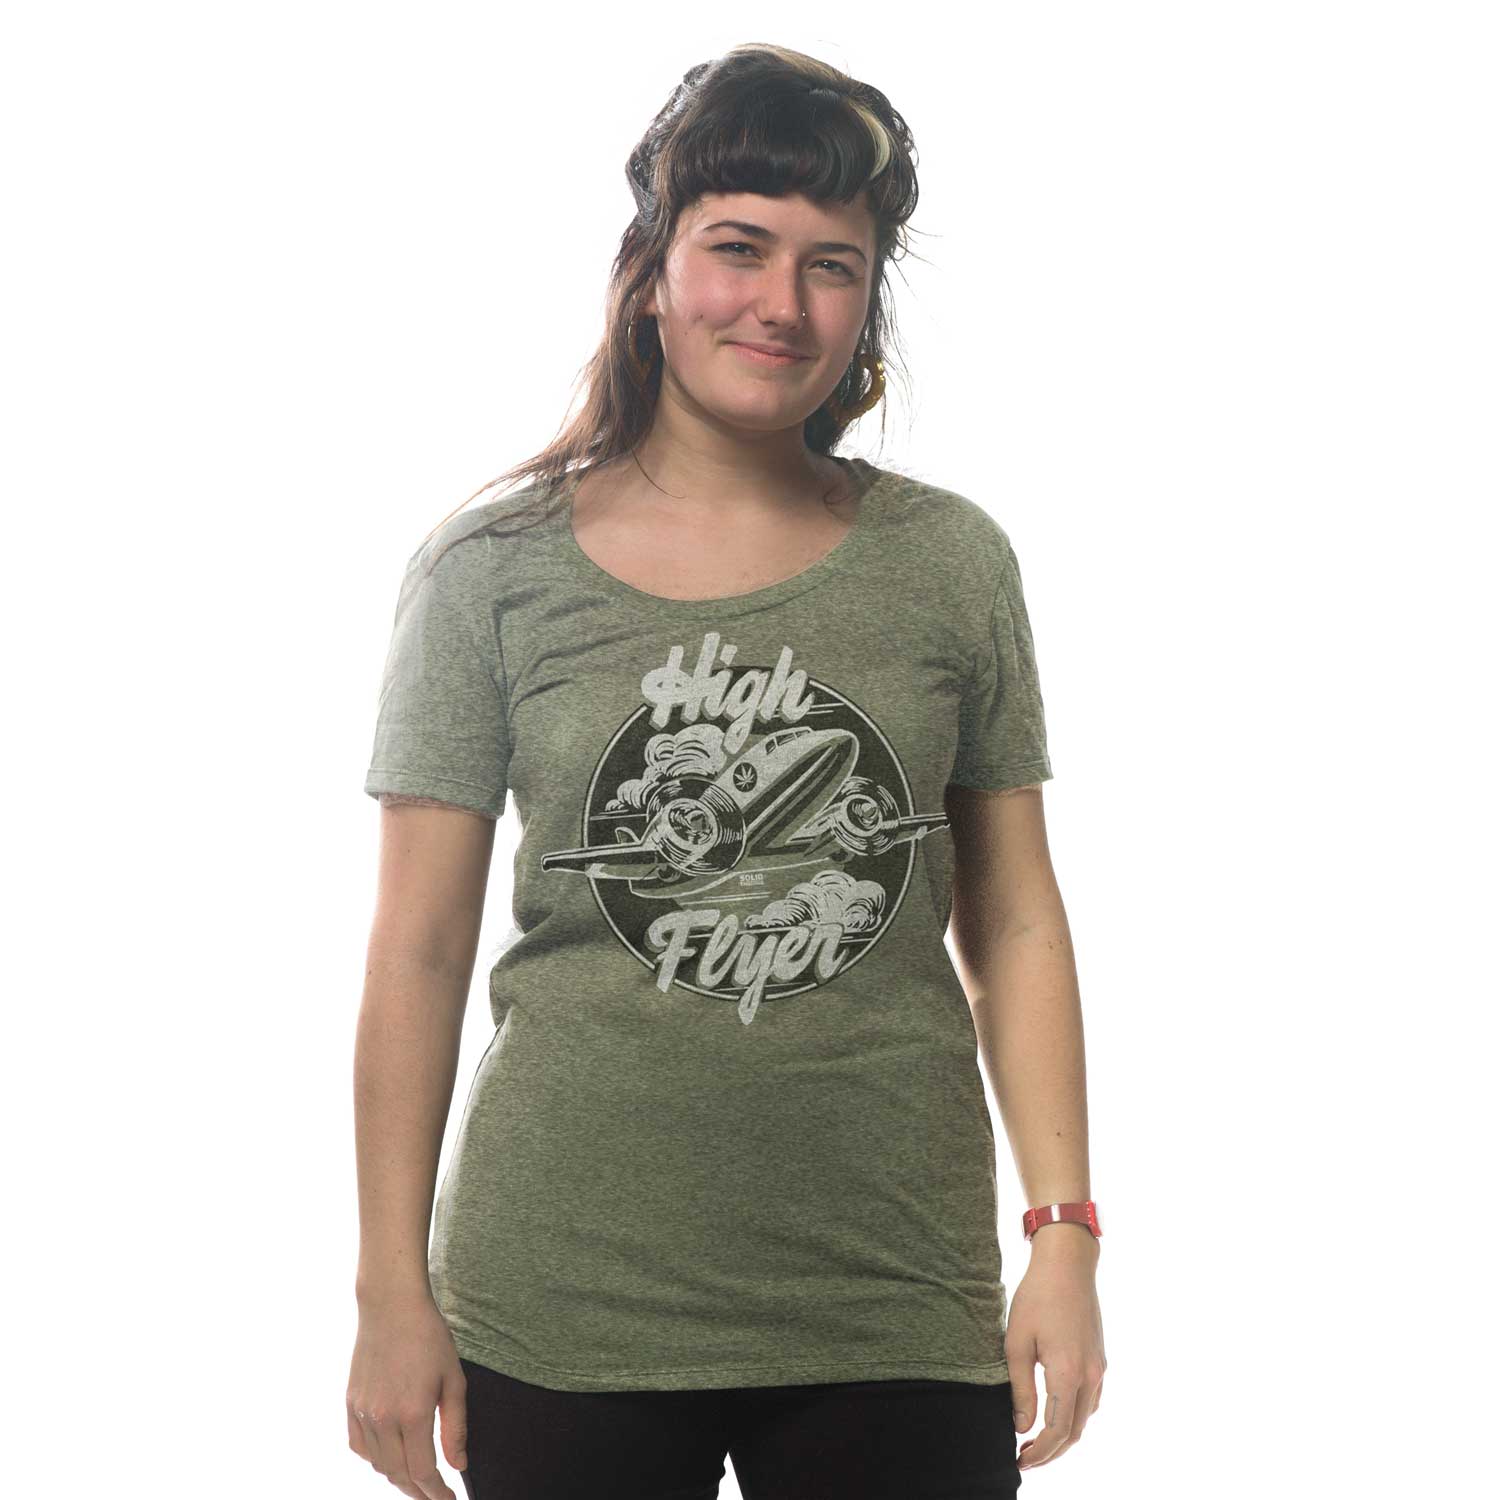 Women's High Flyer Vintage Inspired Scoopneck T-shirt | Retro Marijuana Tee with Airplane Graphic | Solid Threads